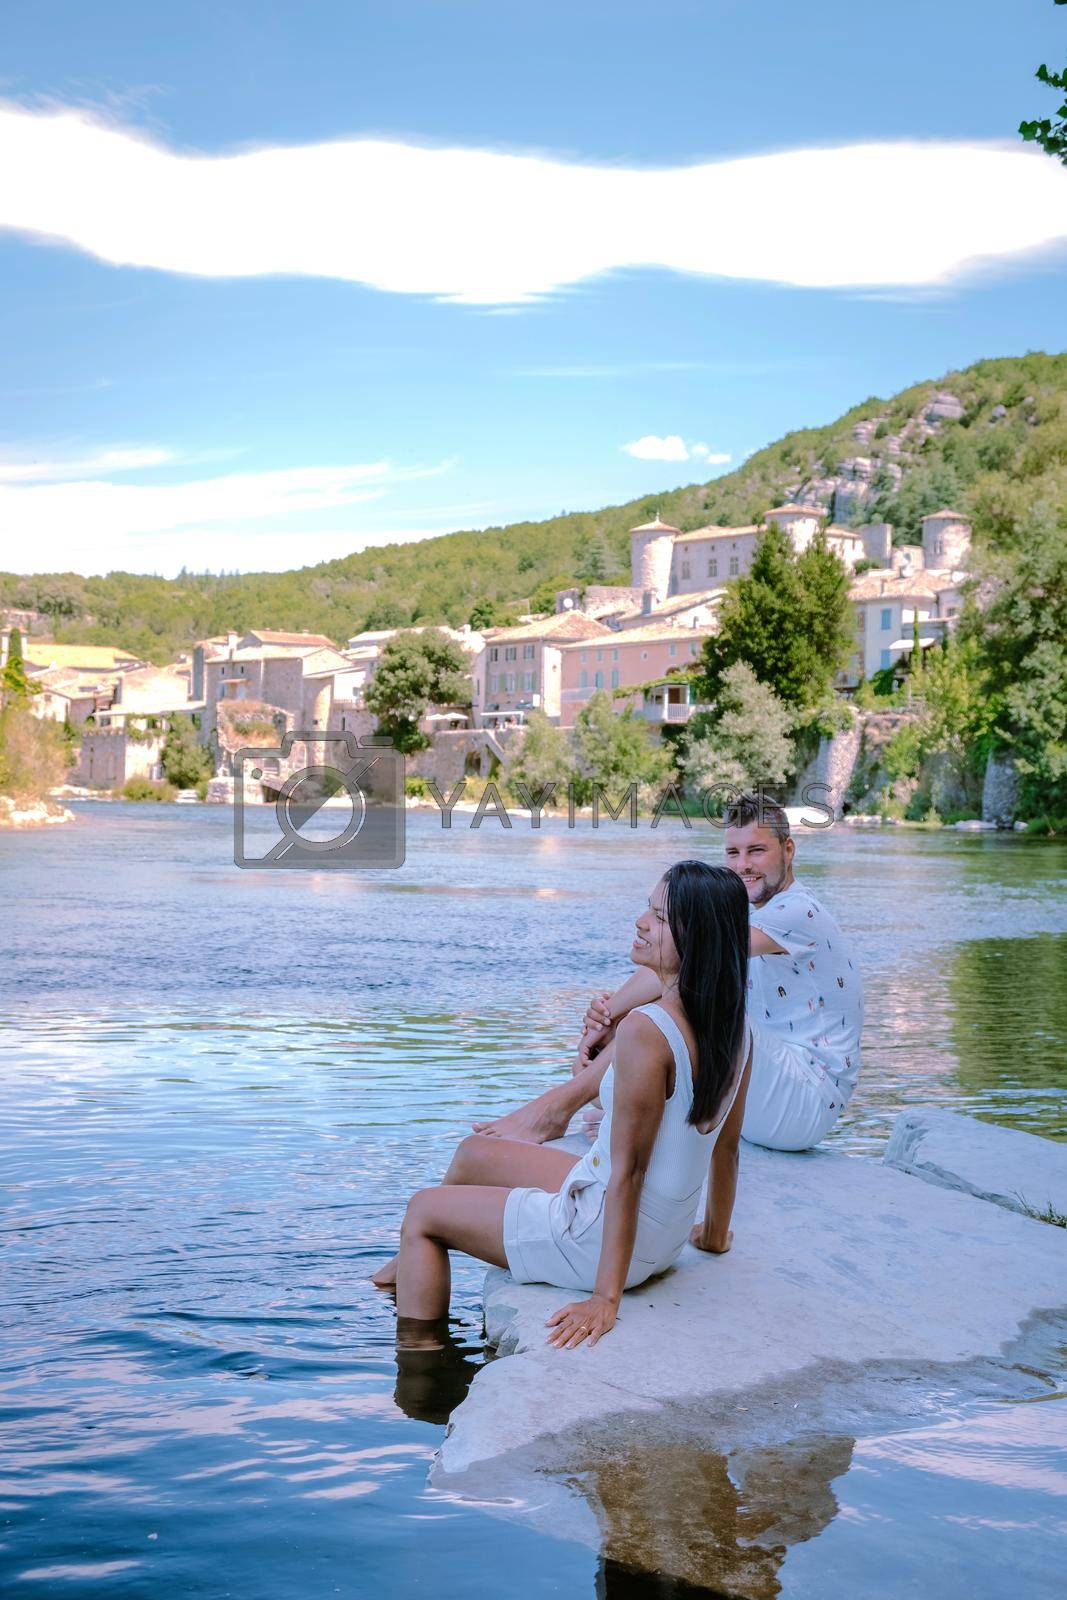 Royalty free image of couple on vacation in Ardeche France, view of the village of Vogue in Ardeche. France by fokkebok